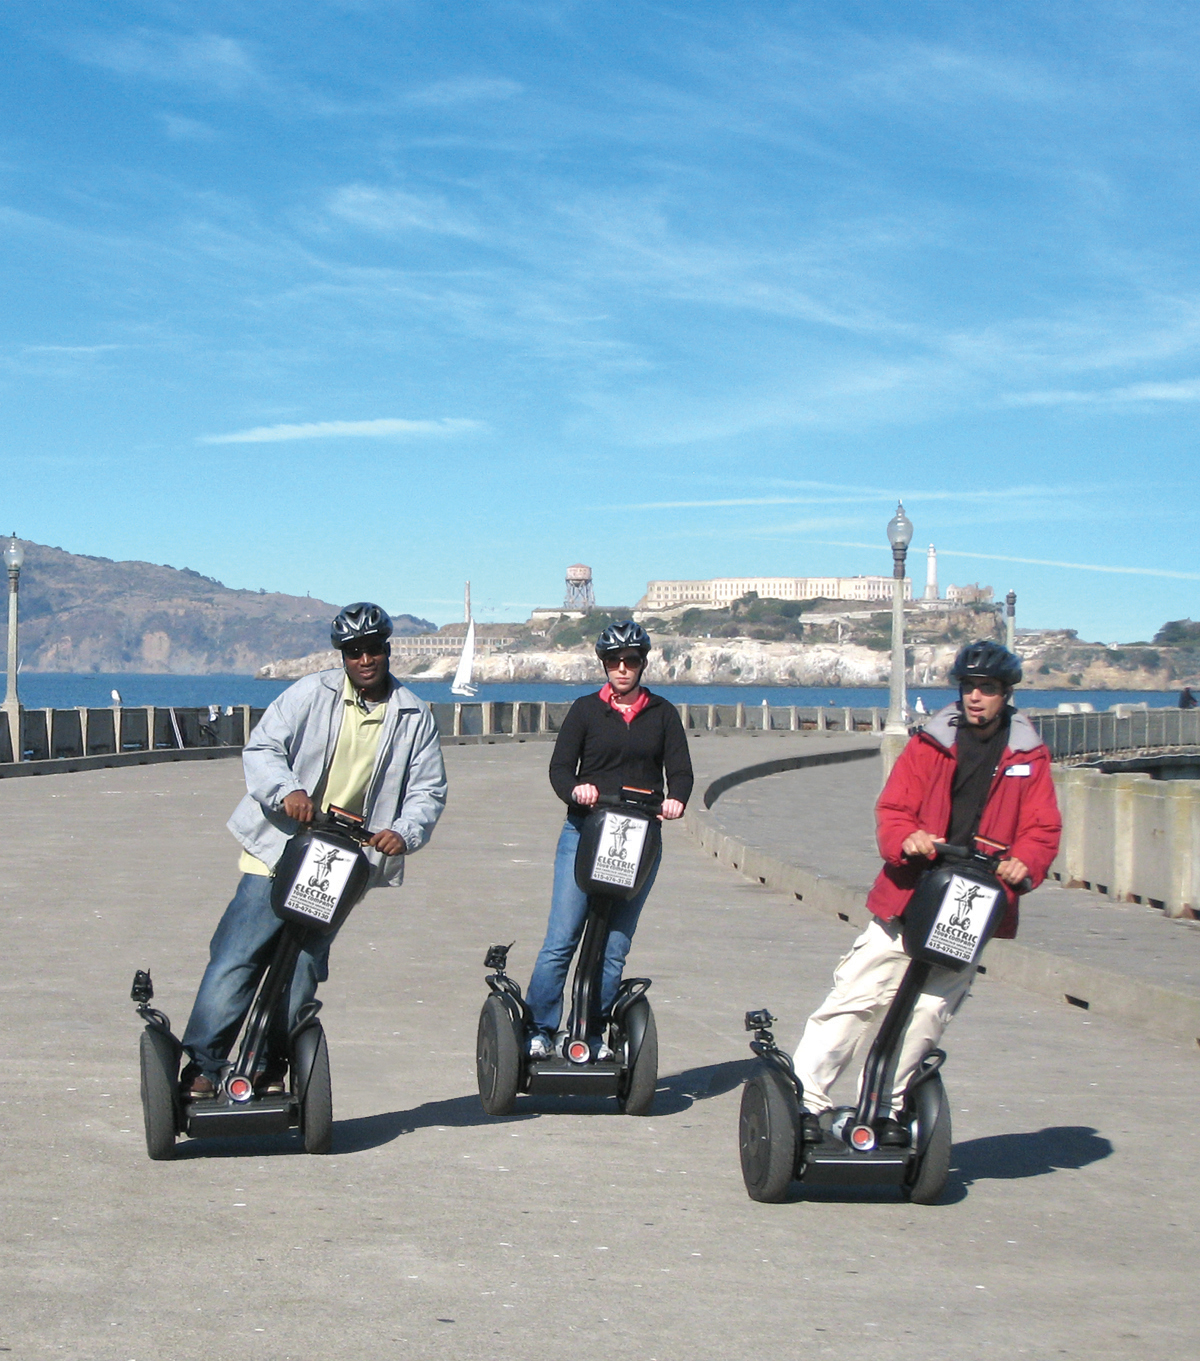 Segway tour on the Maritime Pier with Alcatraz in the background.